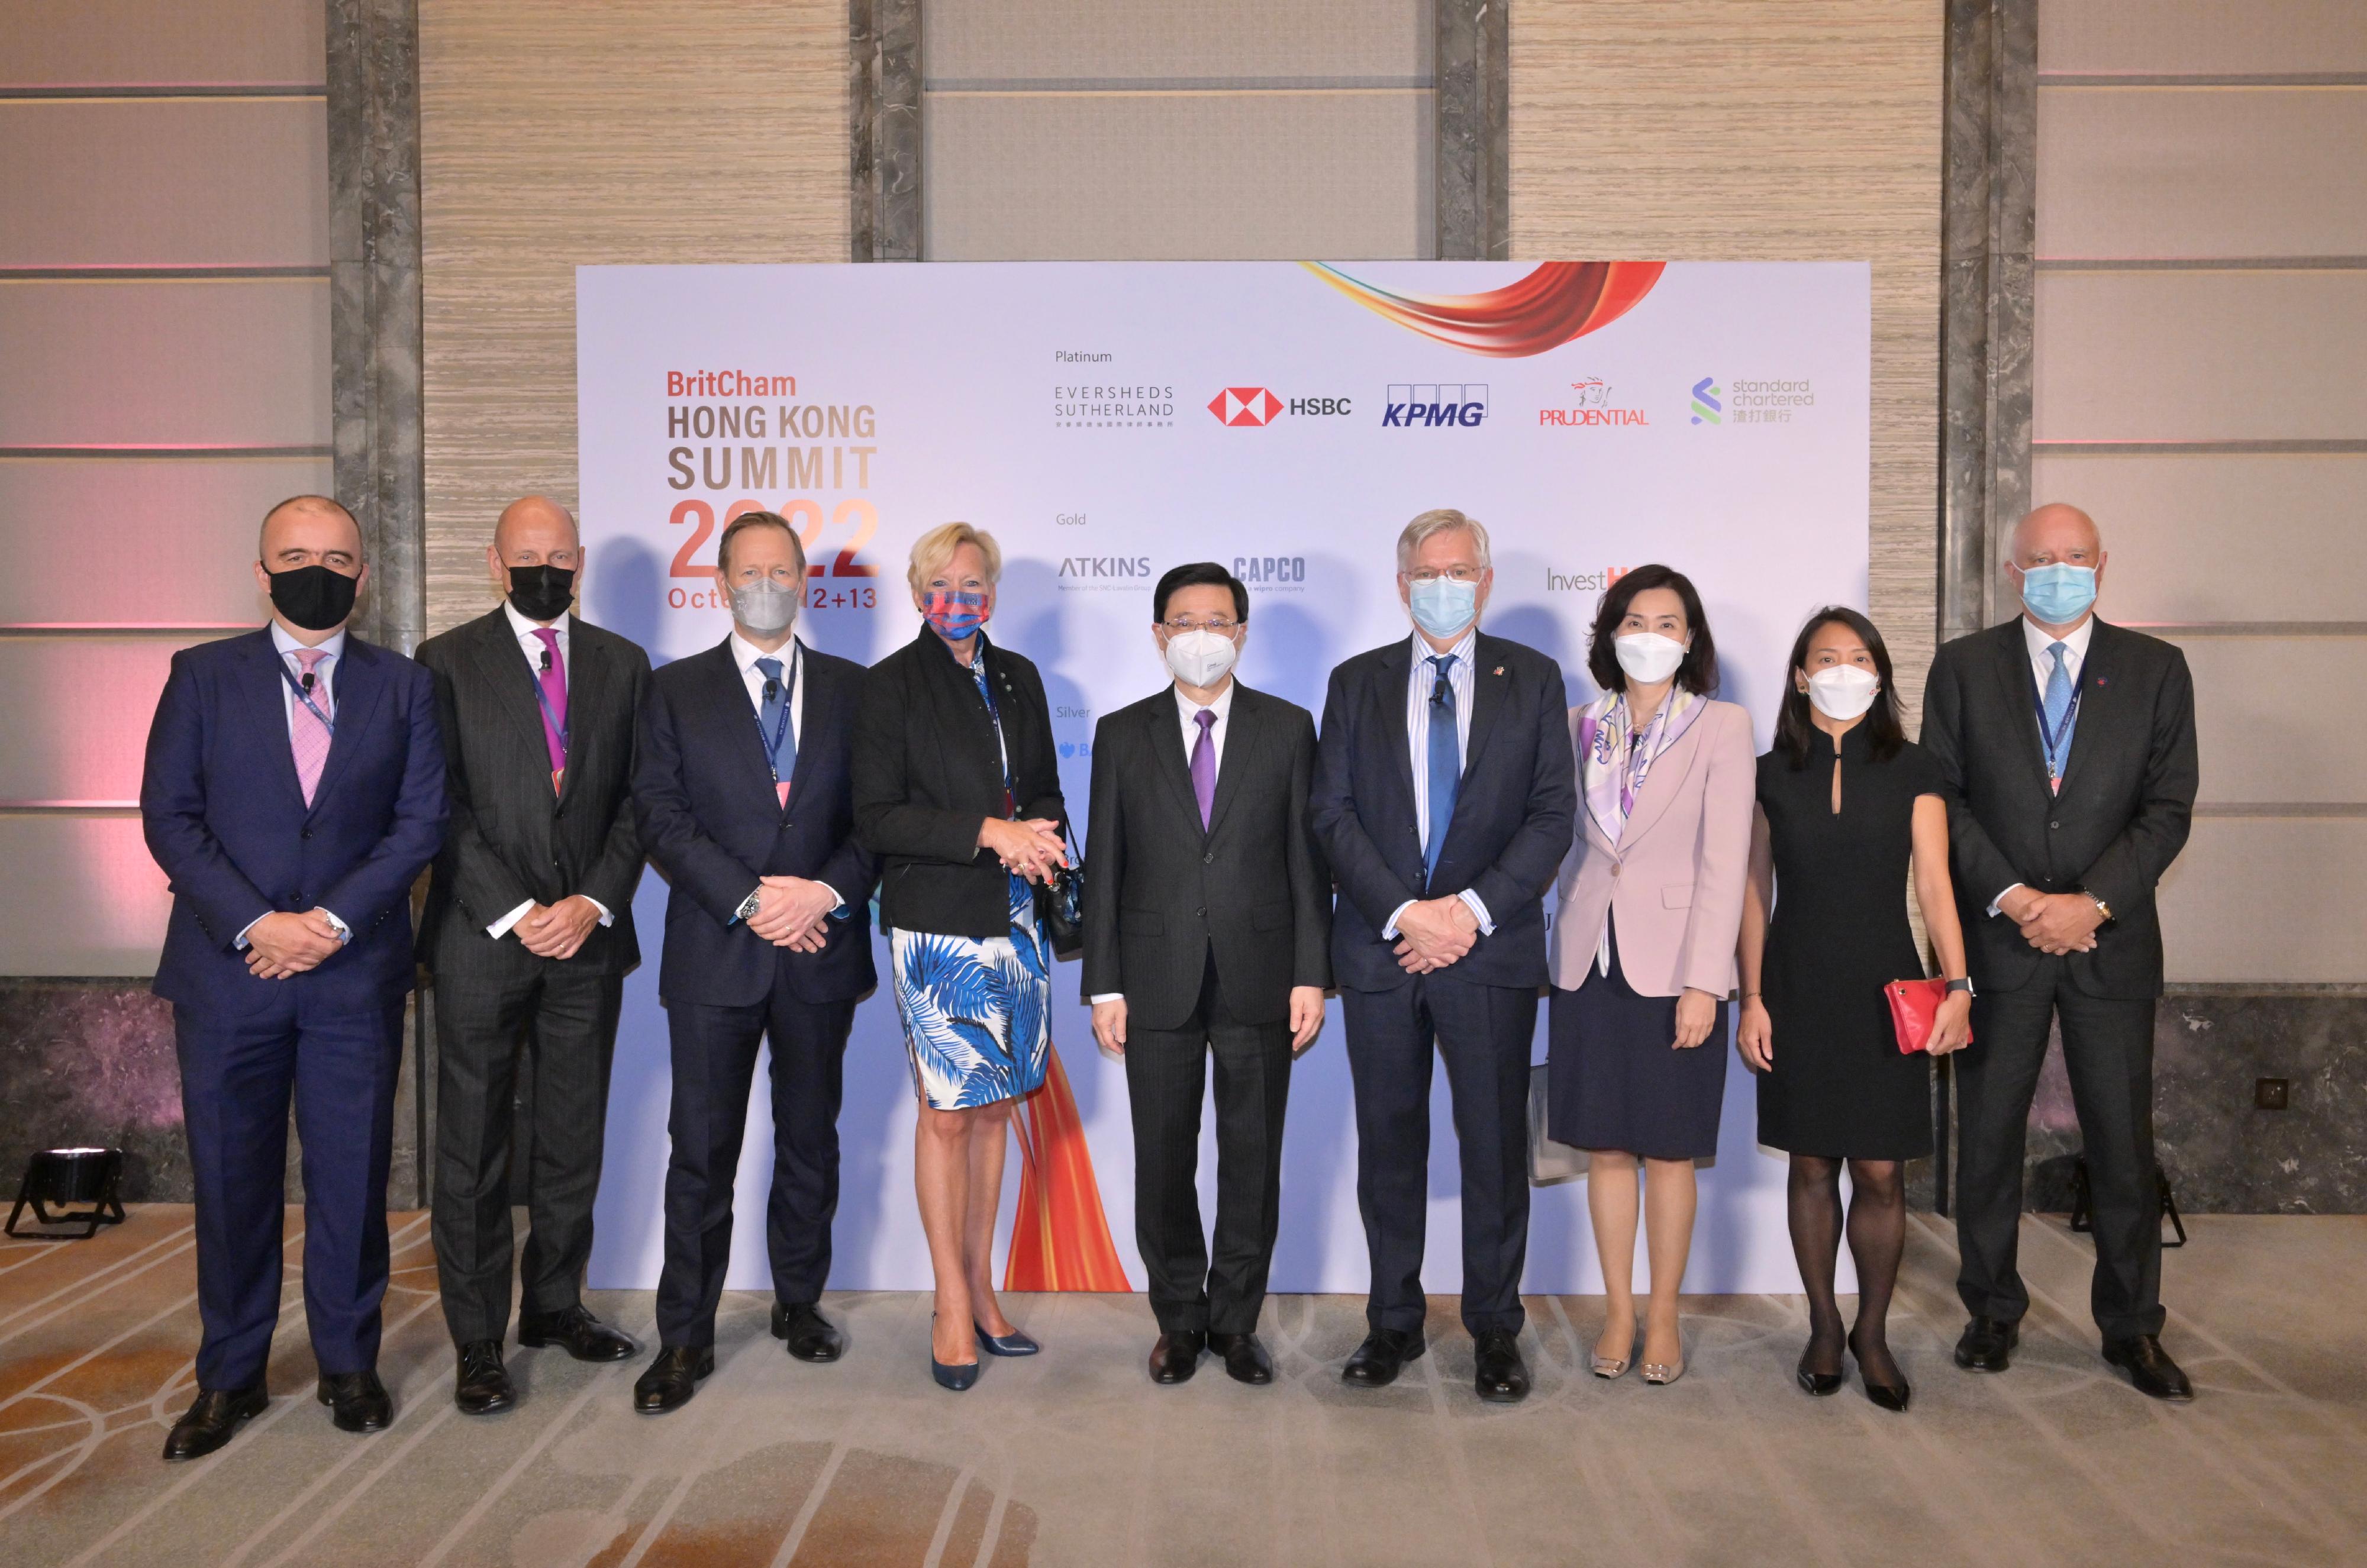 The Chief Executive, Mr John Lee, attended Hong Kong Summit organised by the British Chamber of Commerce in Hong Kong (BritCham) today (October 12). Photo shows Mr Lee (centre); the Chair of BritCham, Dr Anne Kerr (fourth left); former Chair of BritCham Mr Peter Burnett (fourth right), and other guests at the event.